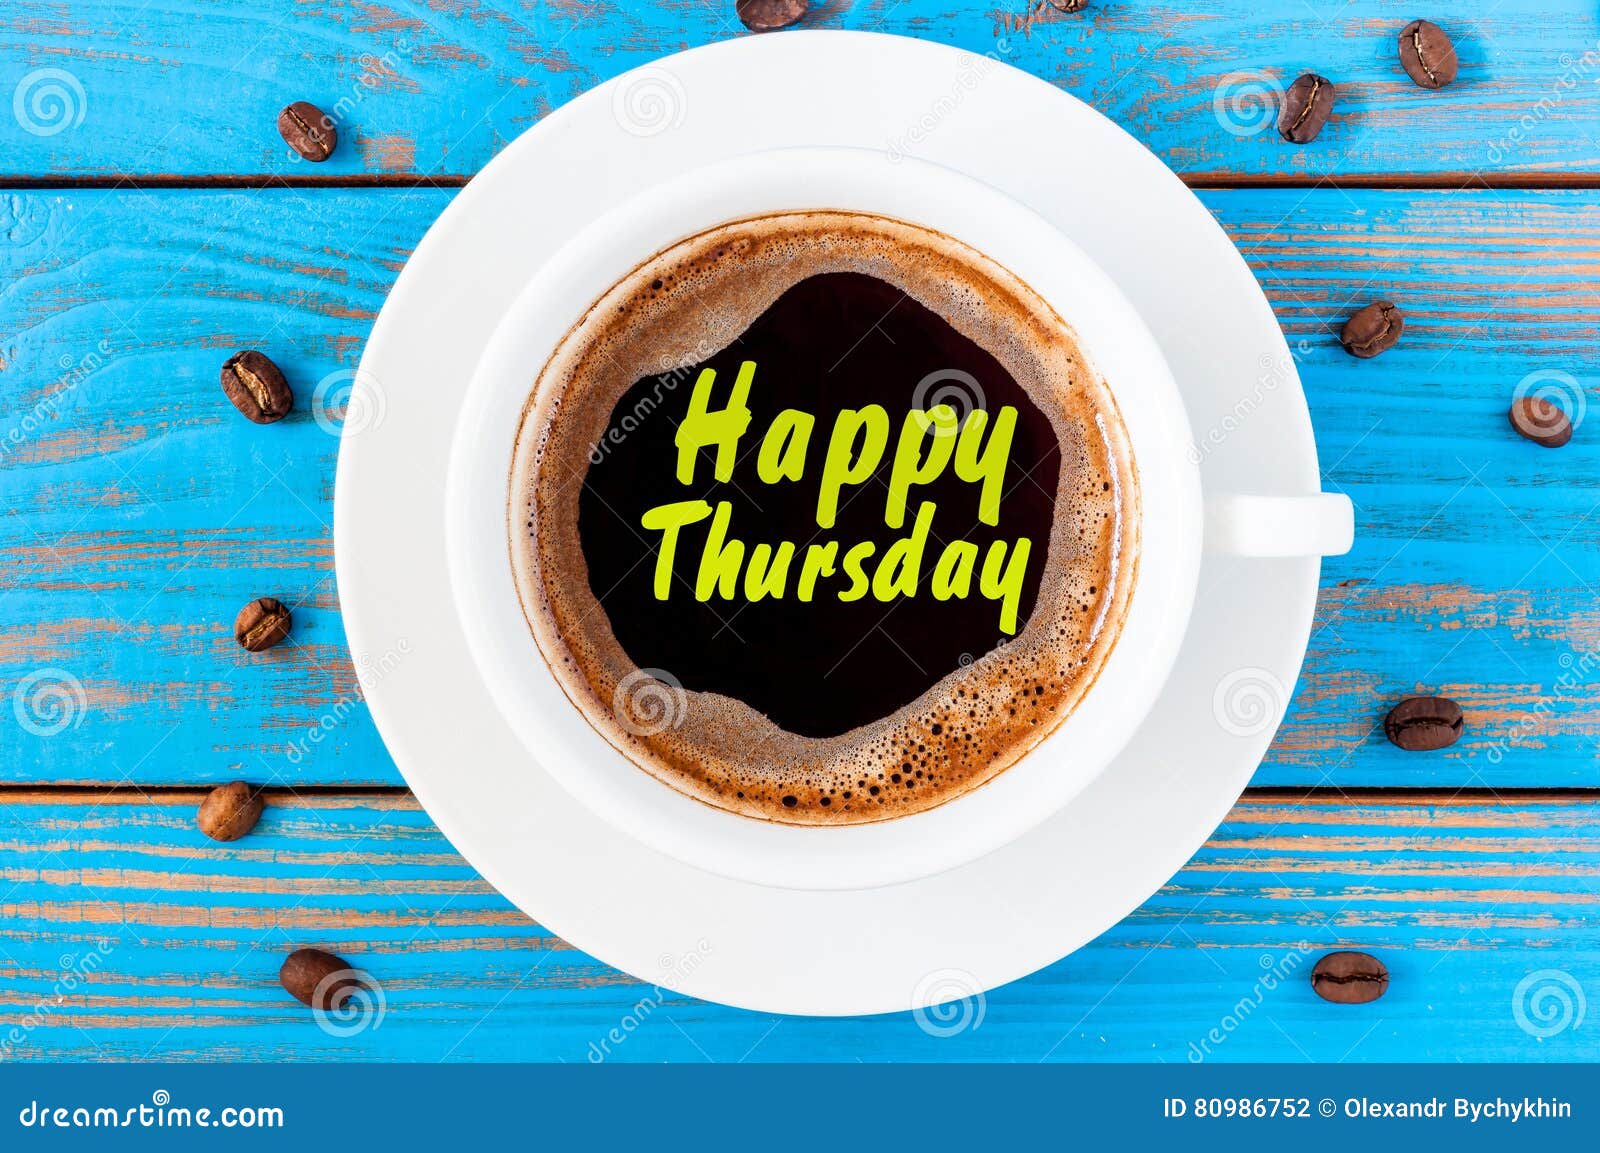 Happy Thursday Word on Coffee Cup at Blurred Blue Wooden Background ...